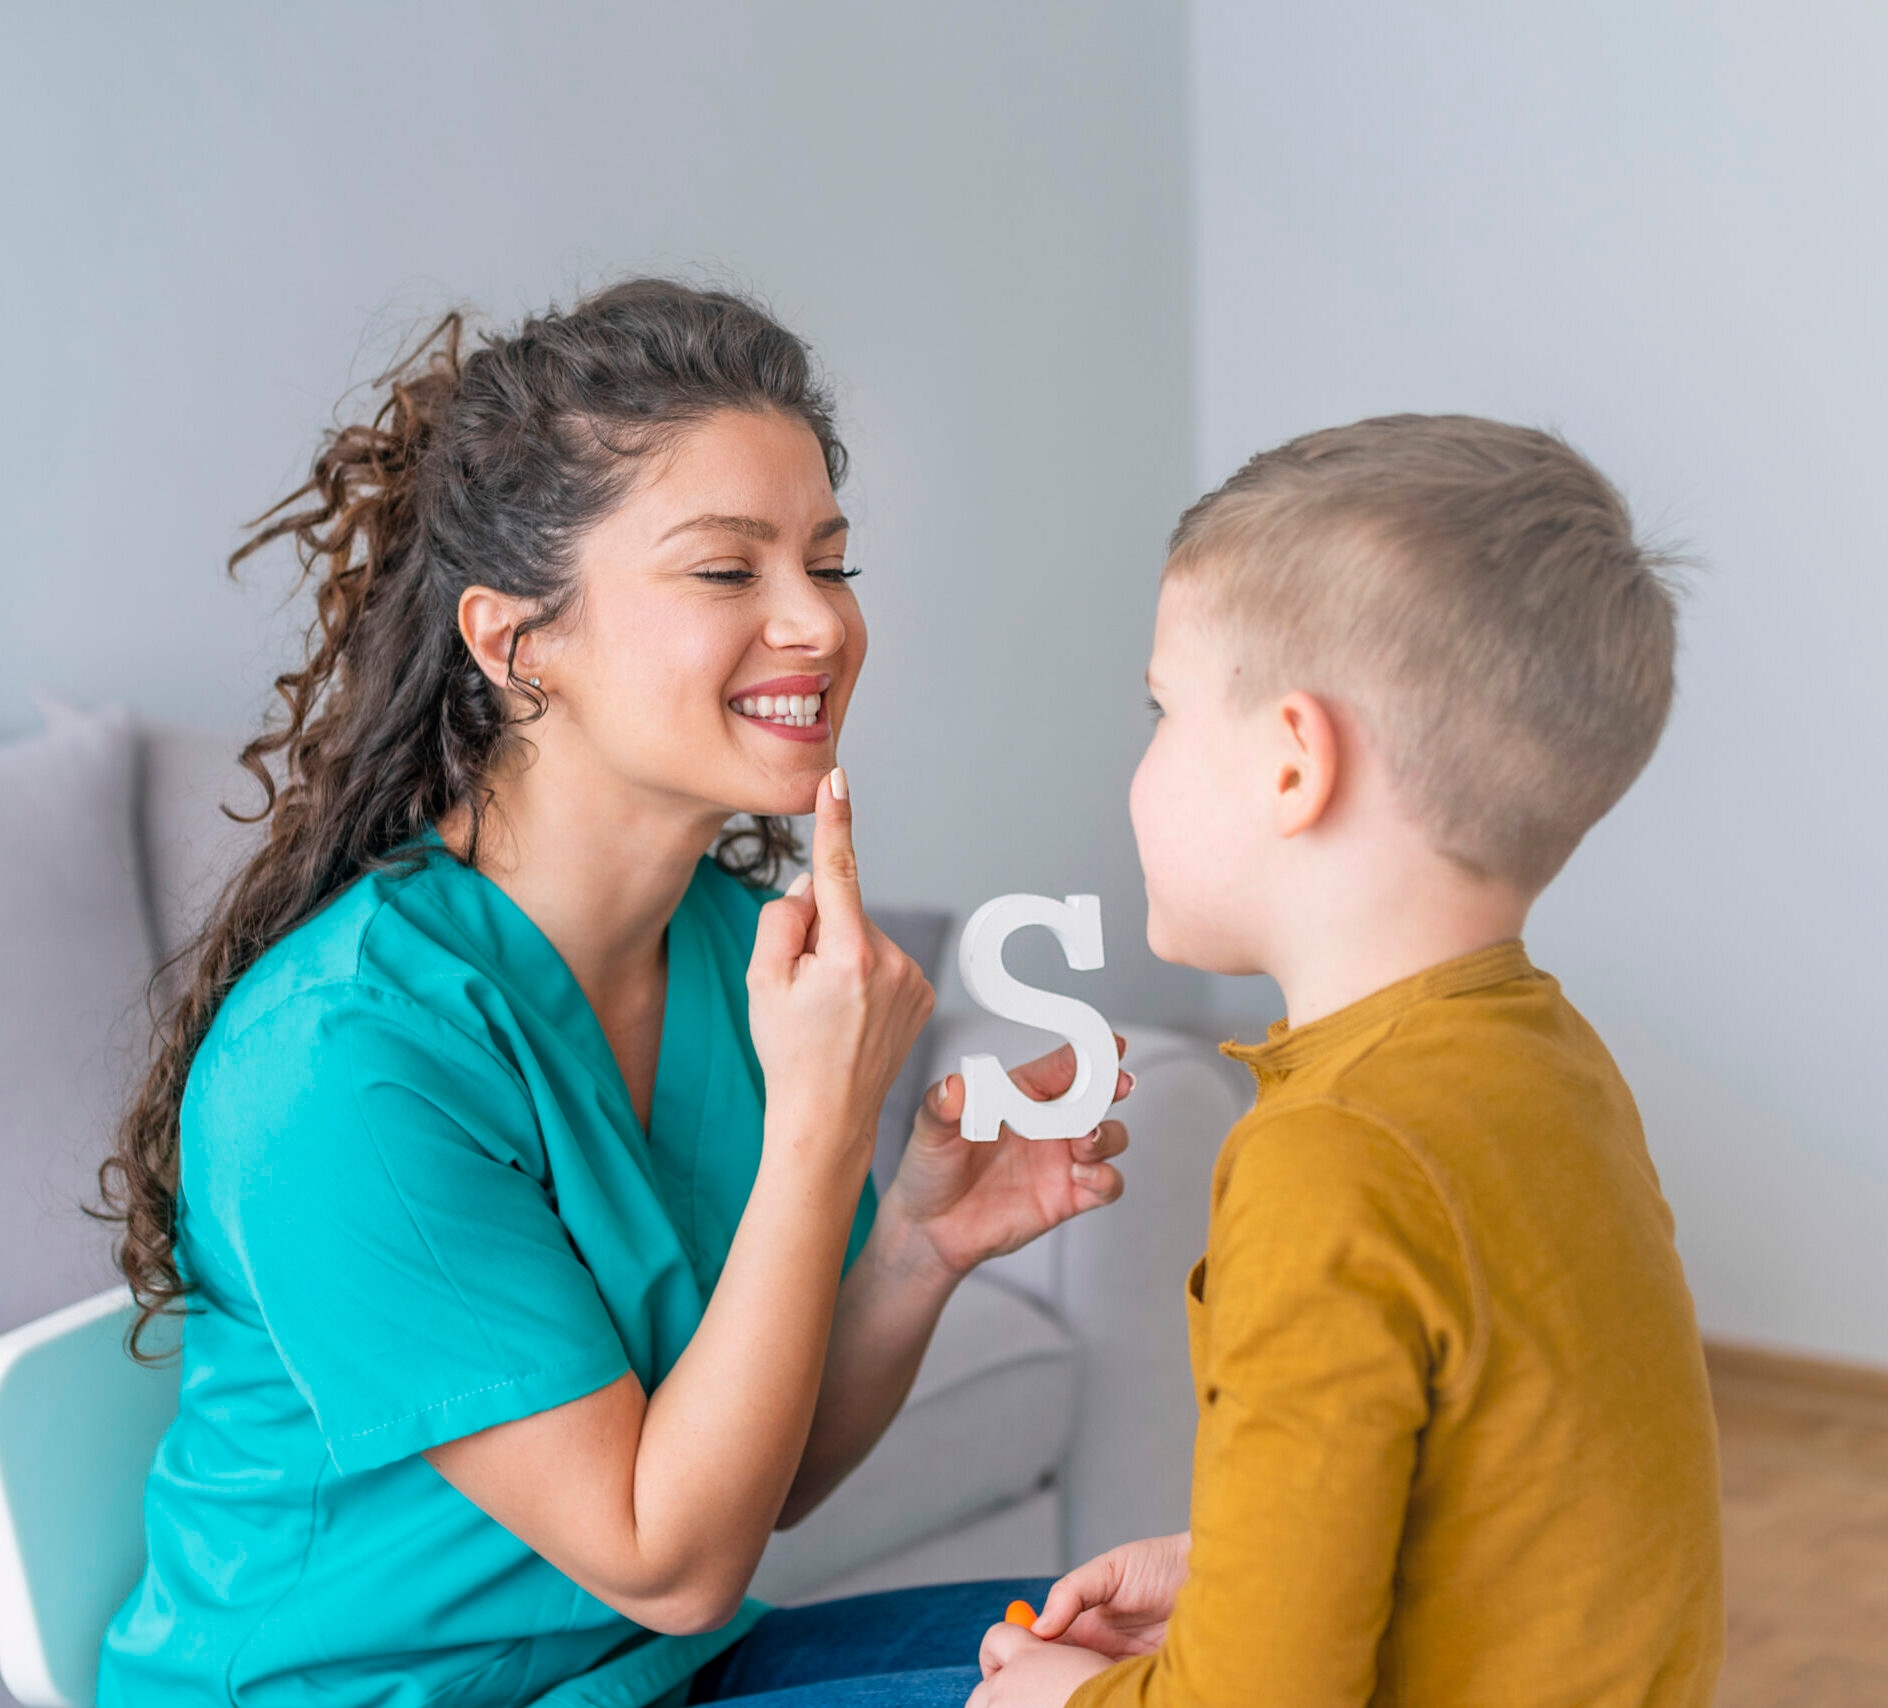 Speech therapist works with young child